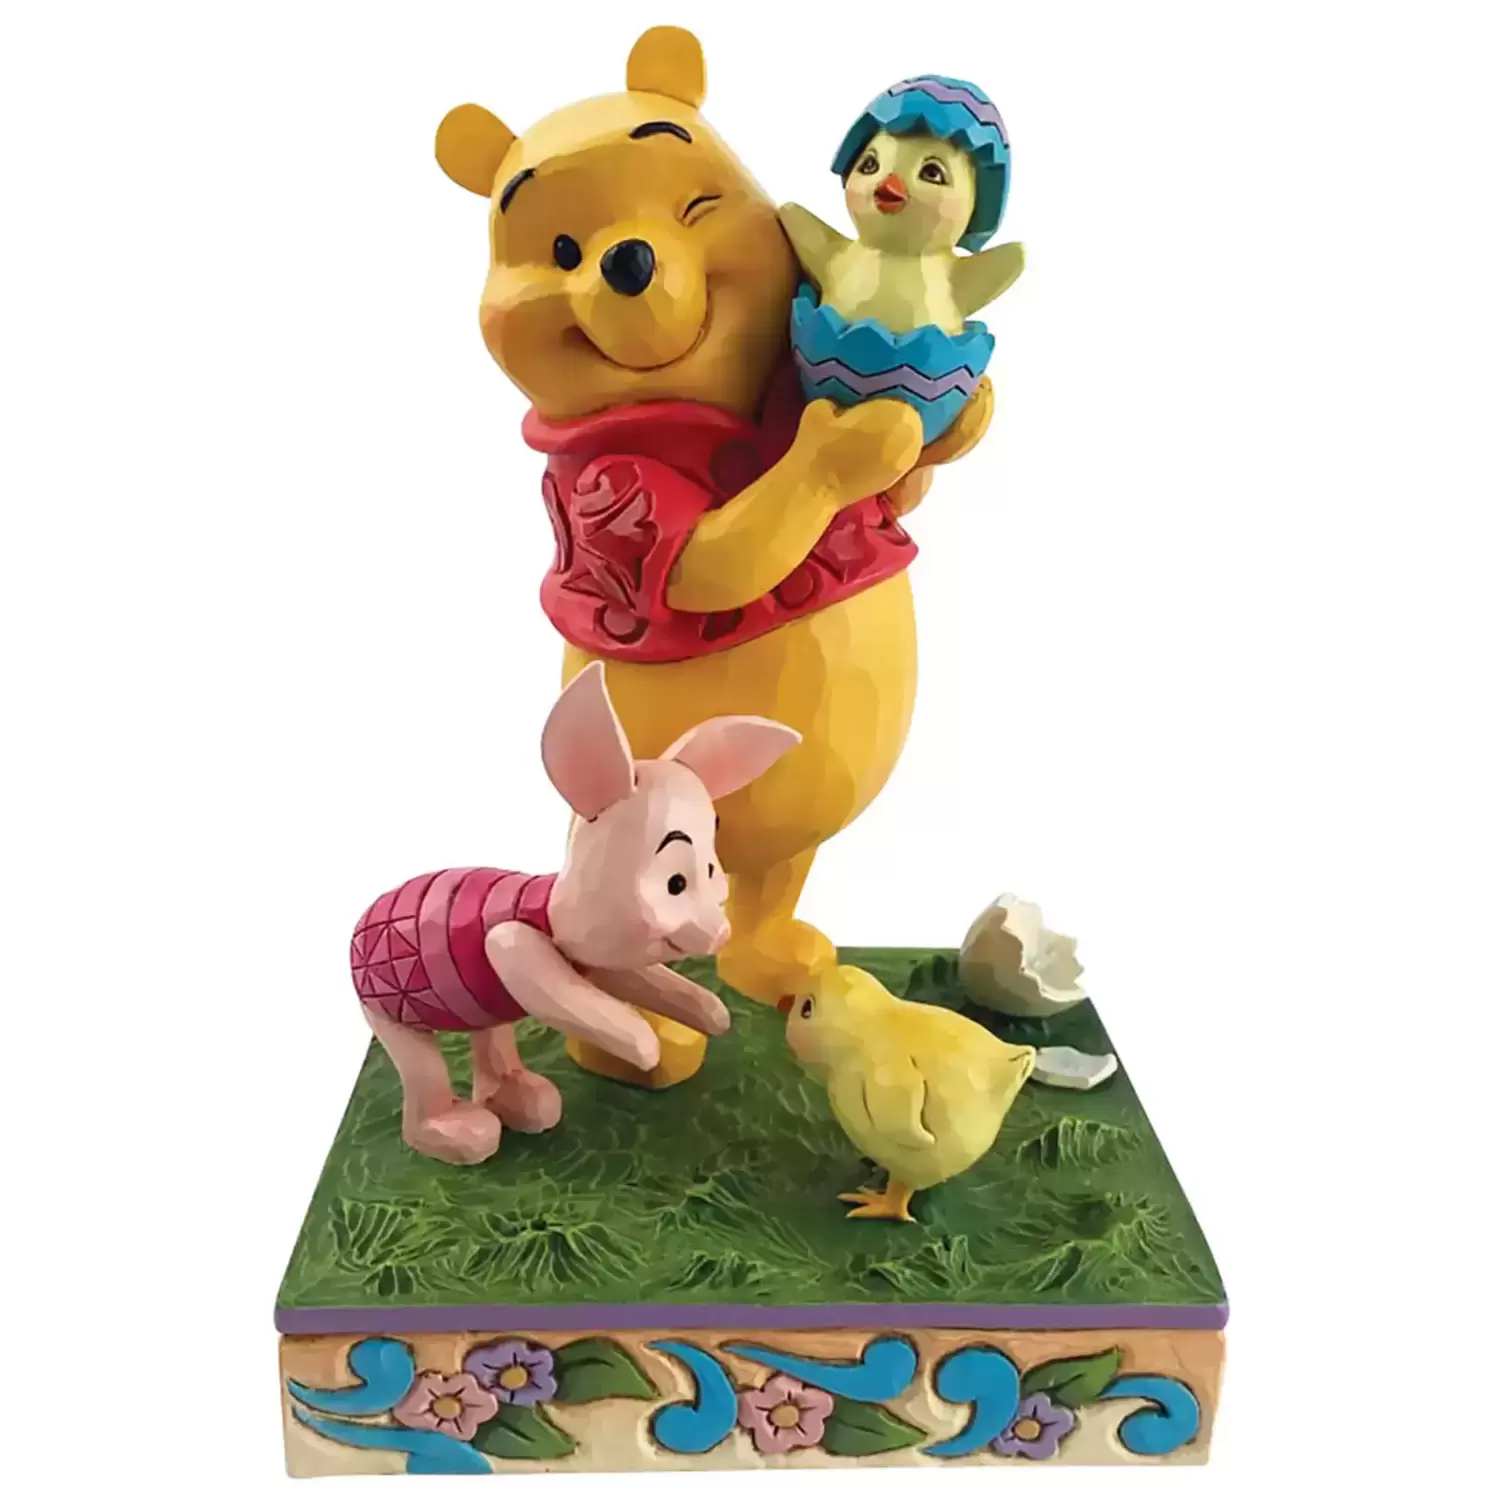 Disney Traditions by Jim Shore - Winnie the Pooh - Easter Pooh & Piglet Figurine